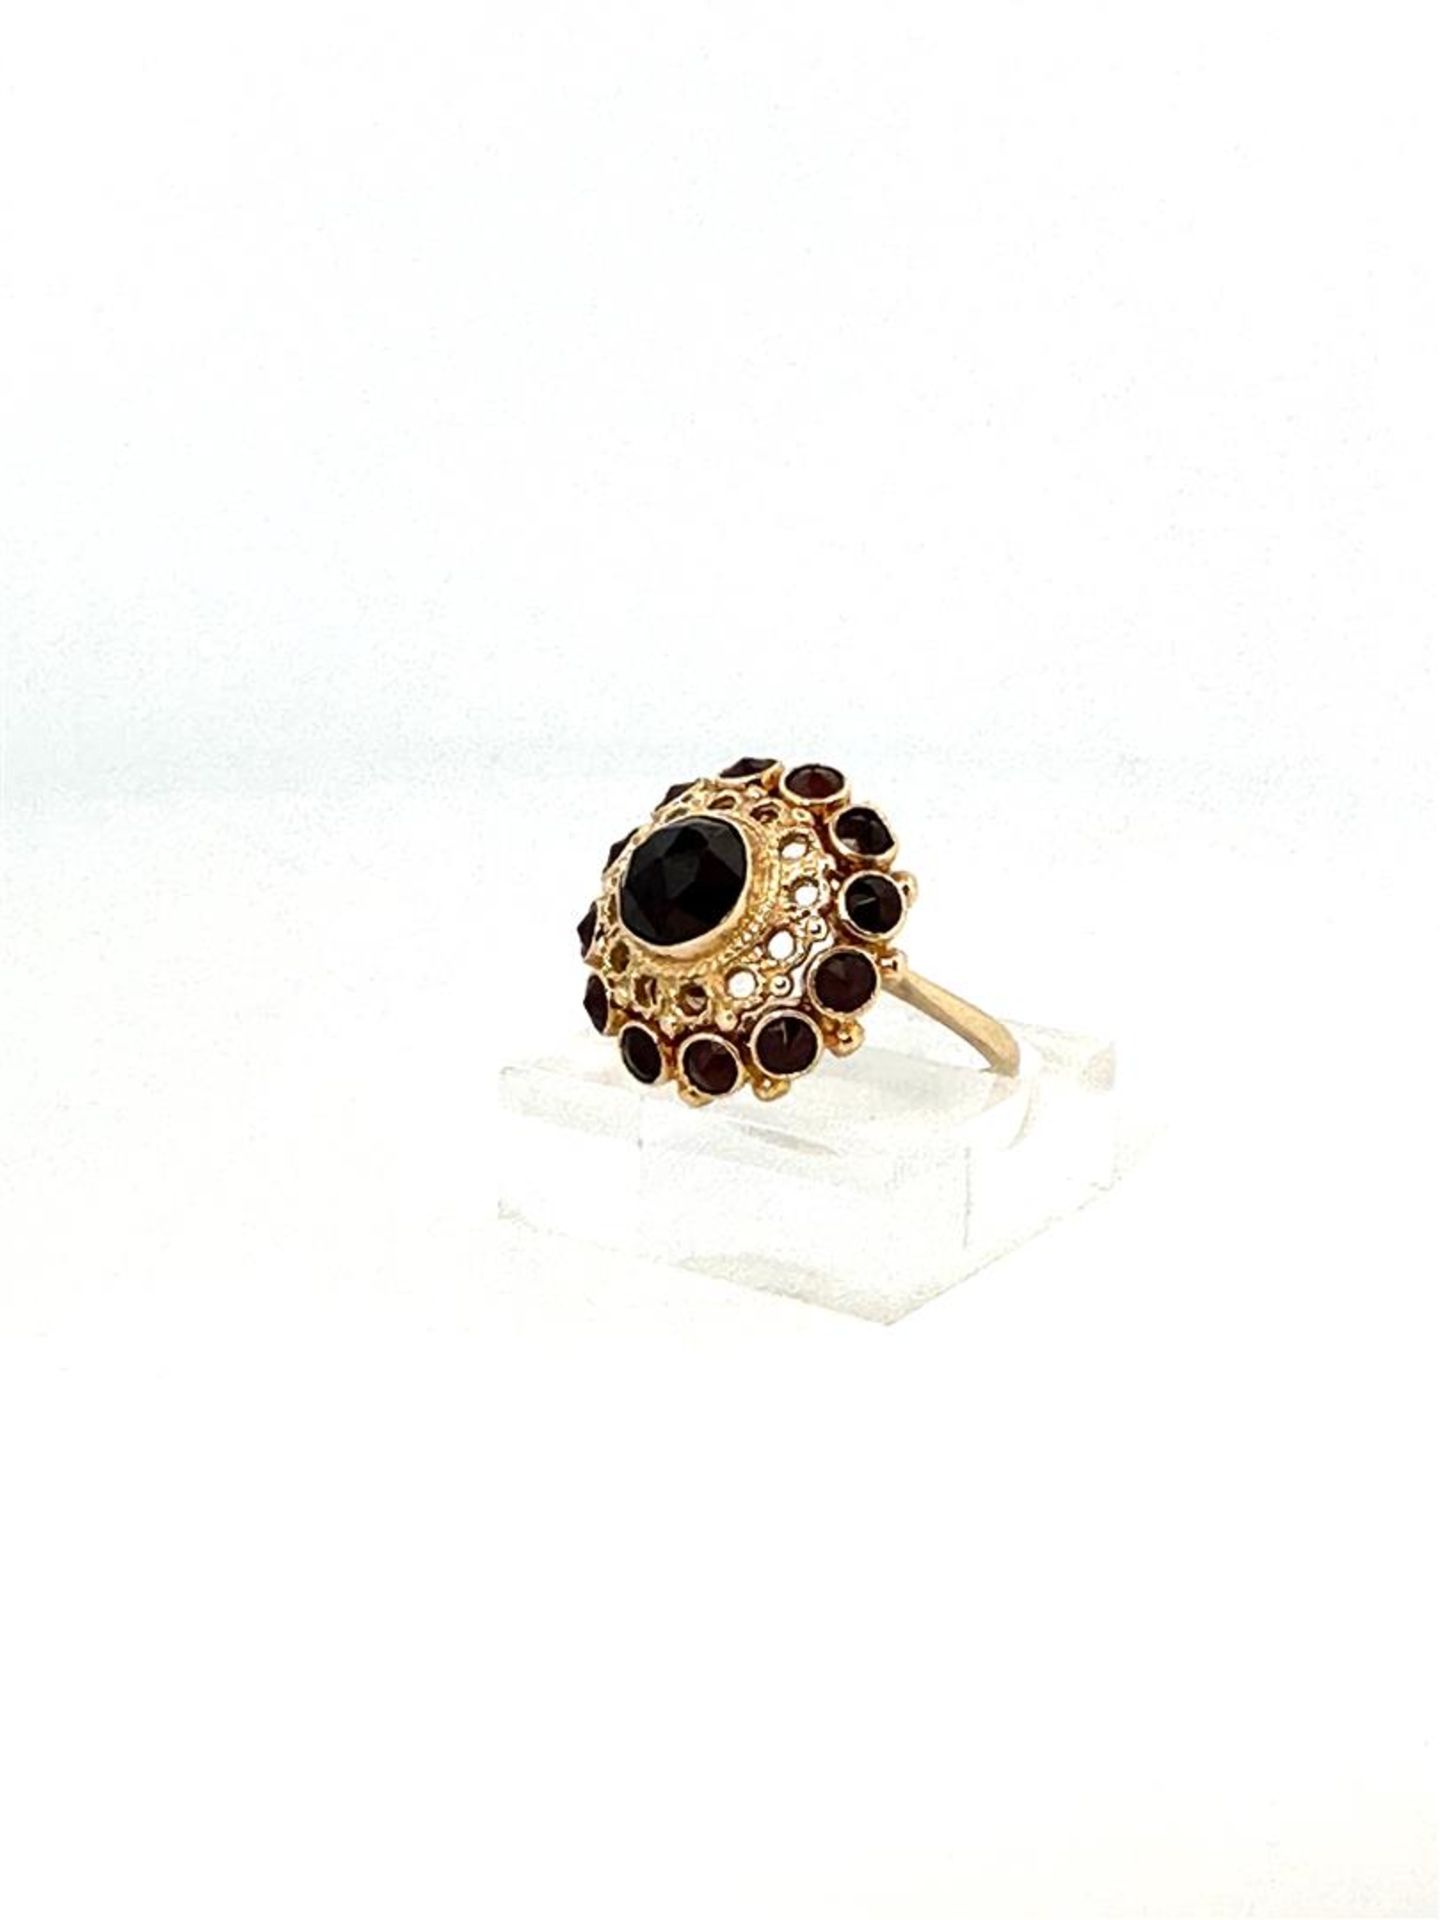 14kt yellow gold rosette ring set with garnet.
The ring is set with 1 central stone, rose cut of app - Image 2 of 4